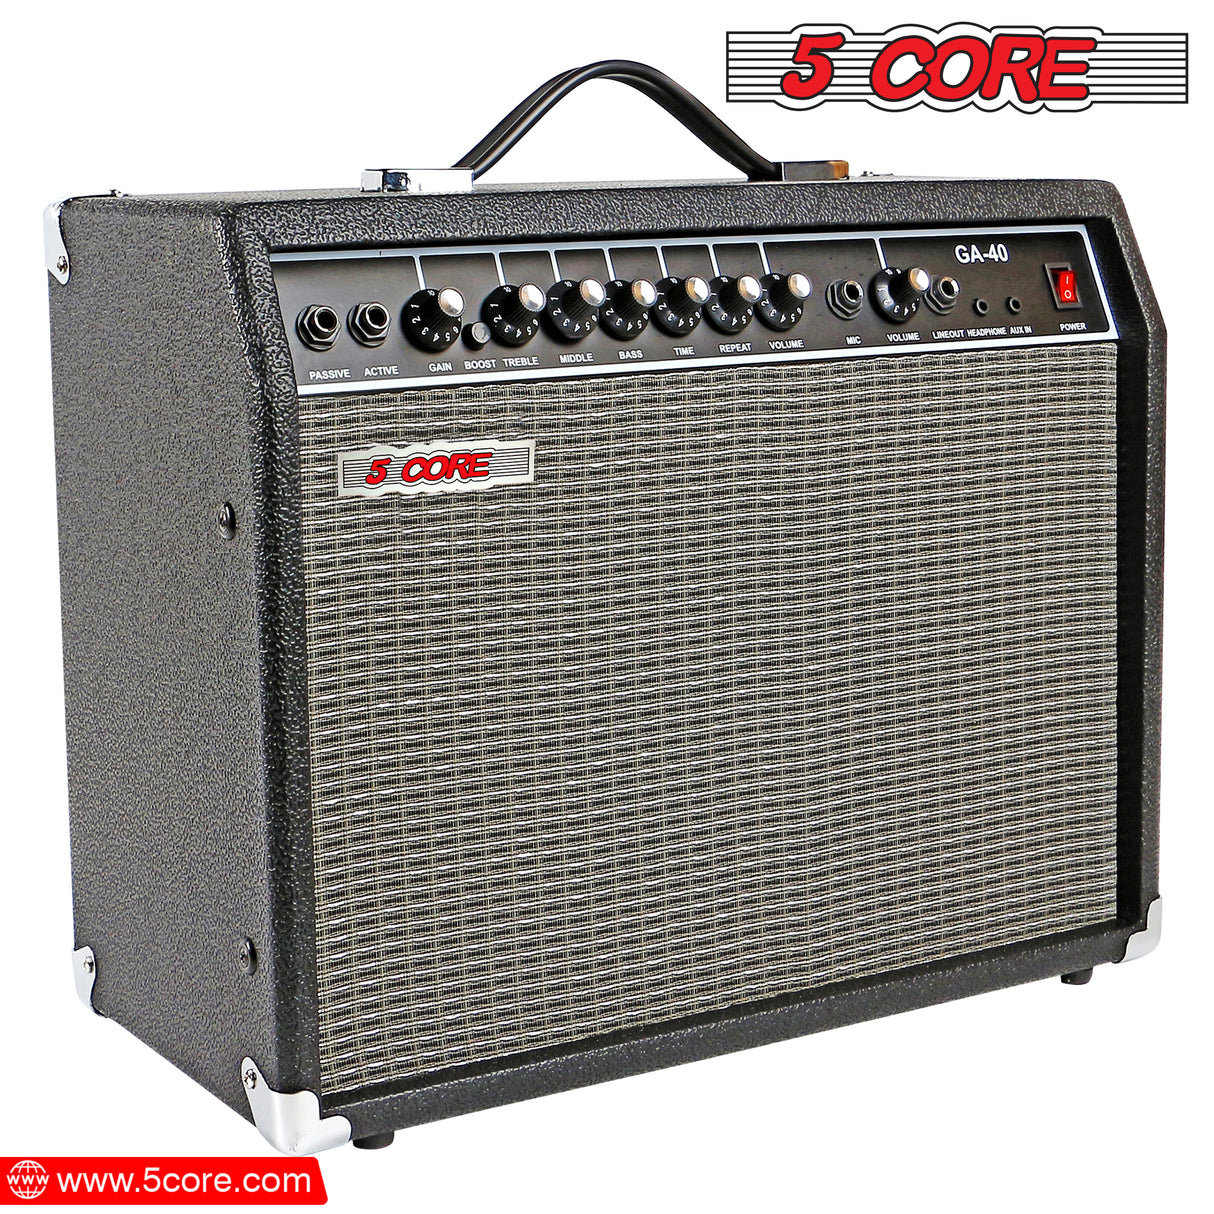 5 Core 40W Guitar Amplifier Black - Clean and Distortion Channel - Electric Amp with Equalization and AUX Line Input - for Recording Studio, Practice Room, Small Courtyard- GA 40 BLK